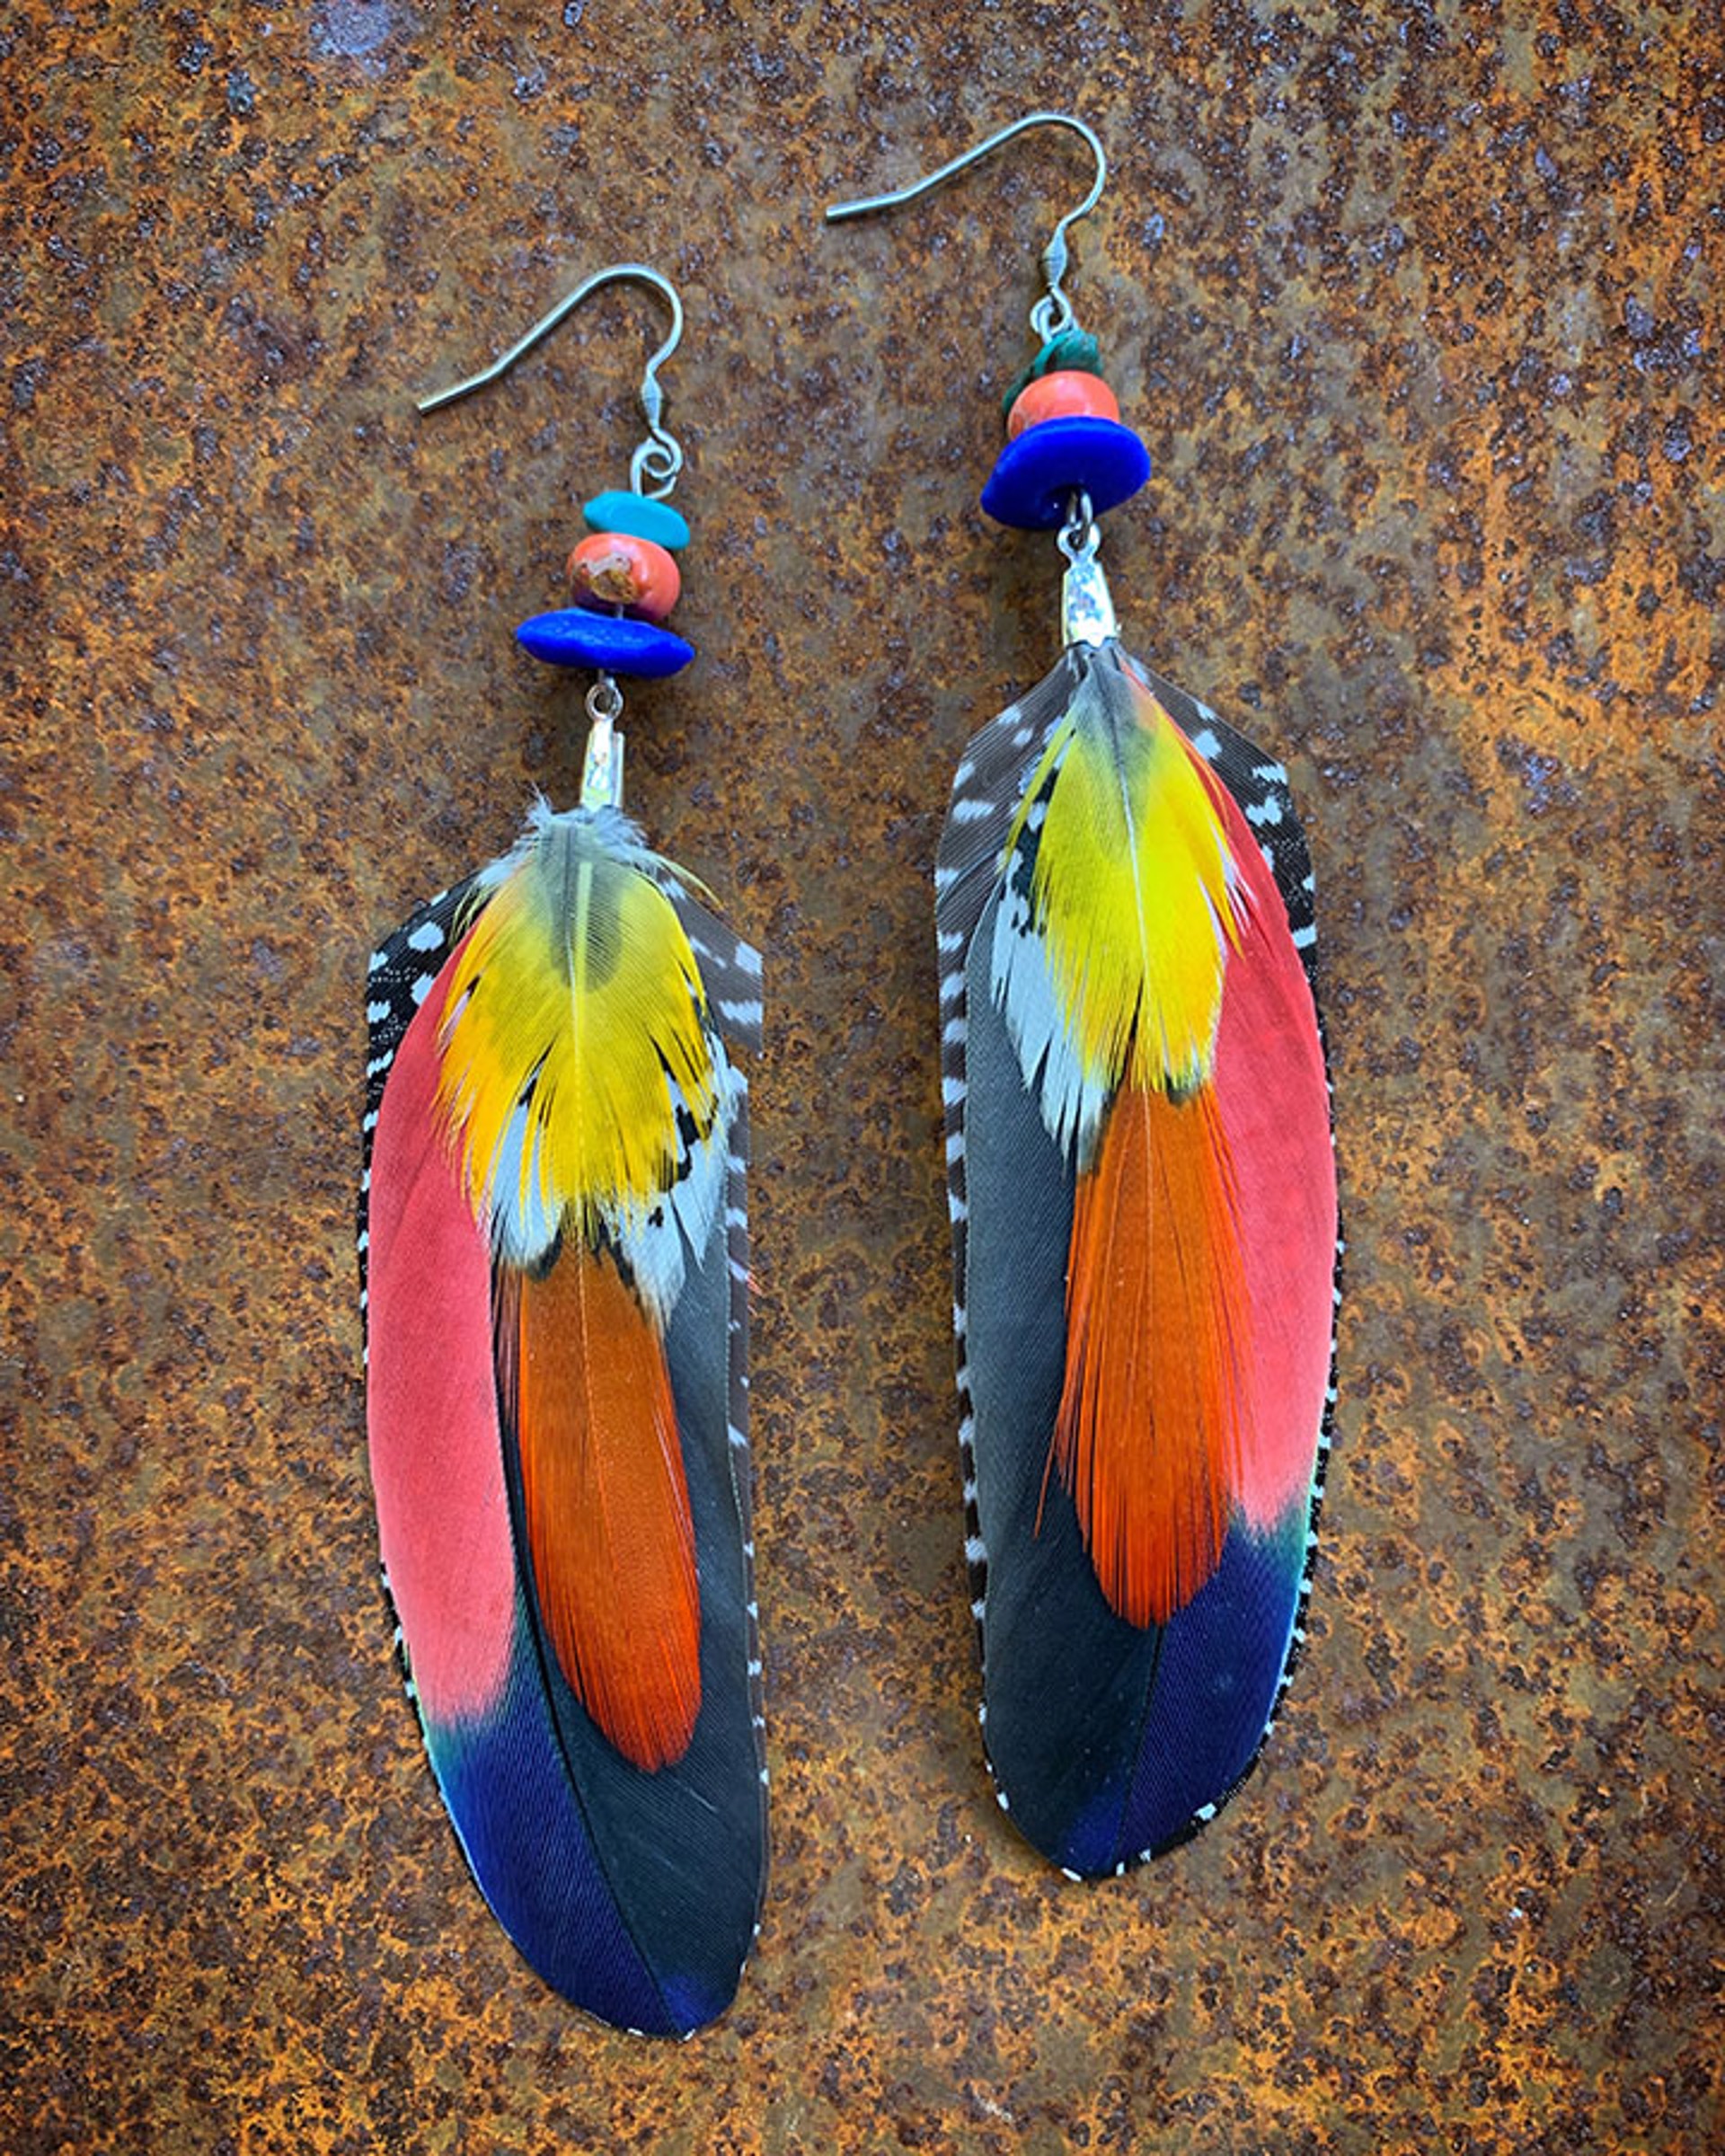 K657 Salmon Feather Earrings by Kelly Ormsby